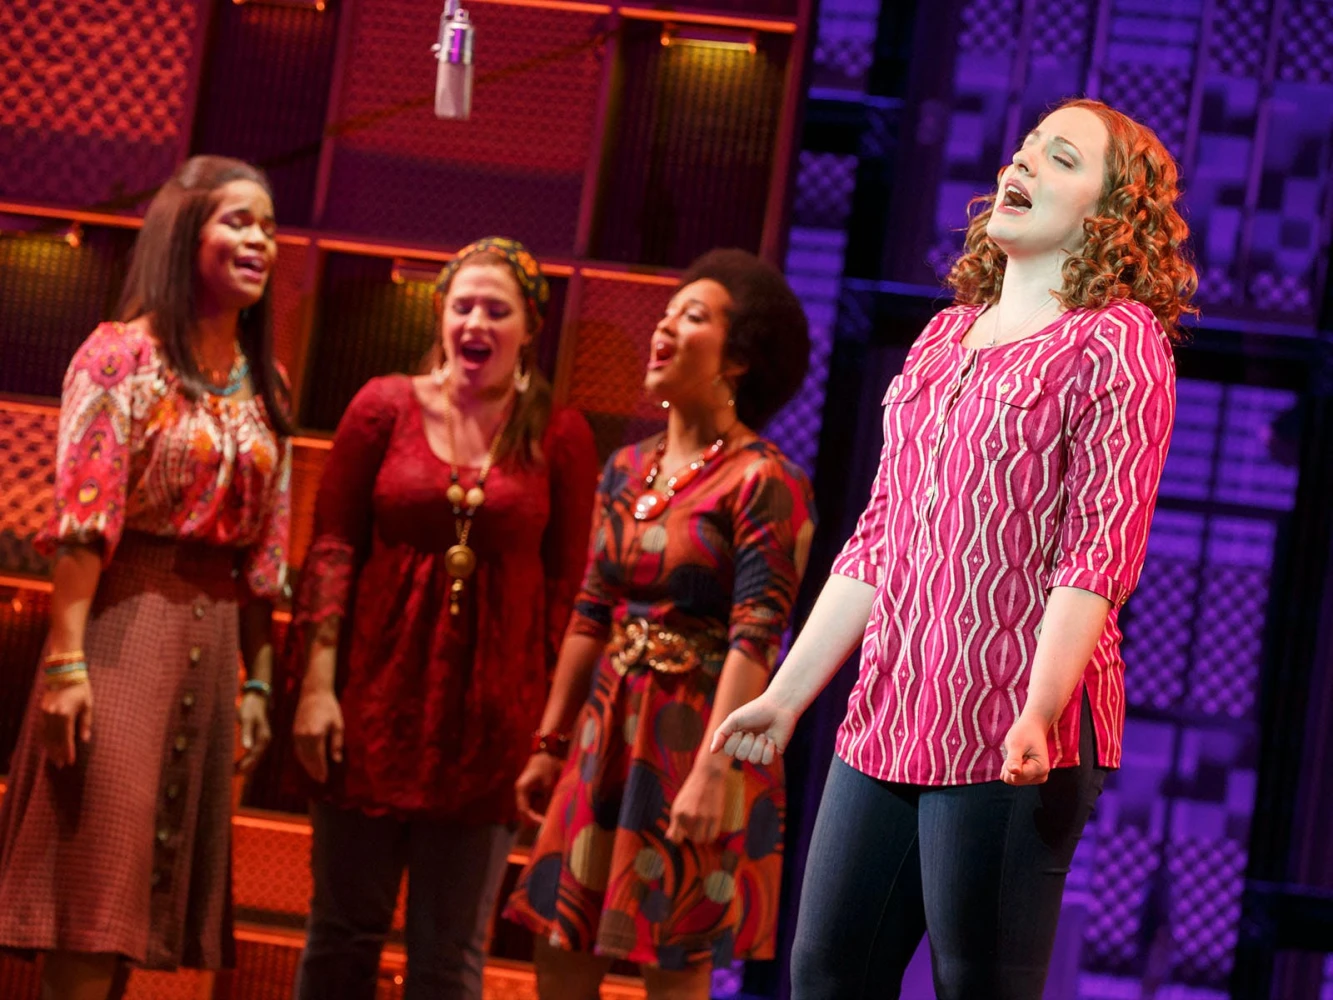 Beautiful: The Carole King Musical: What to expect - 5